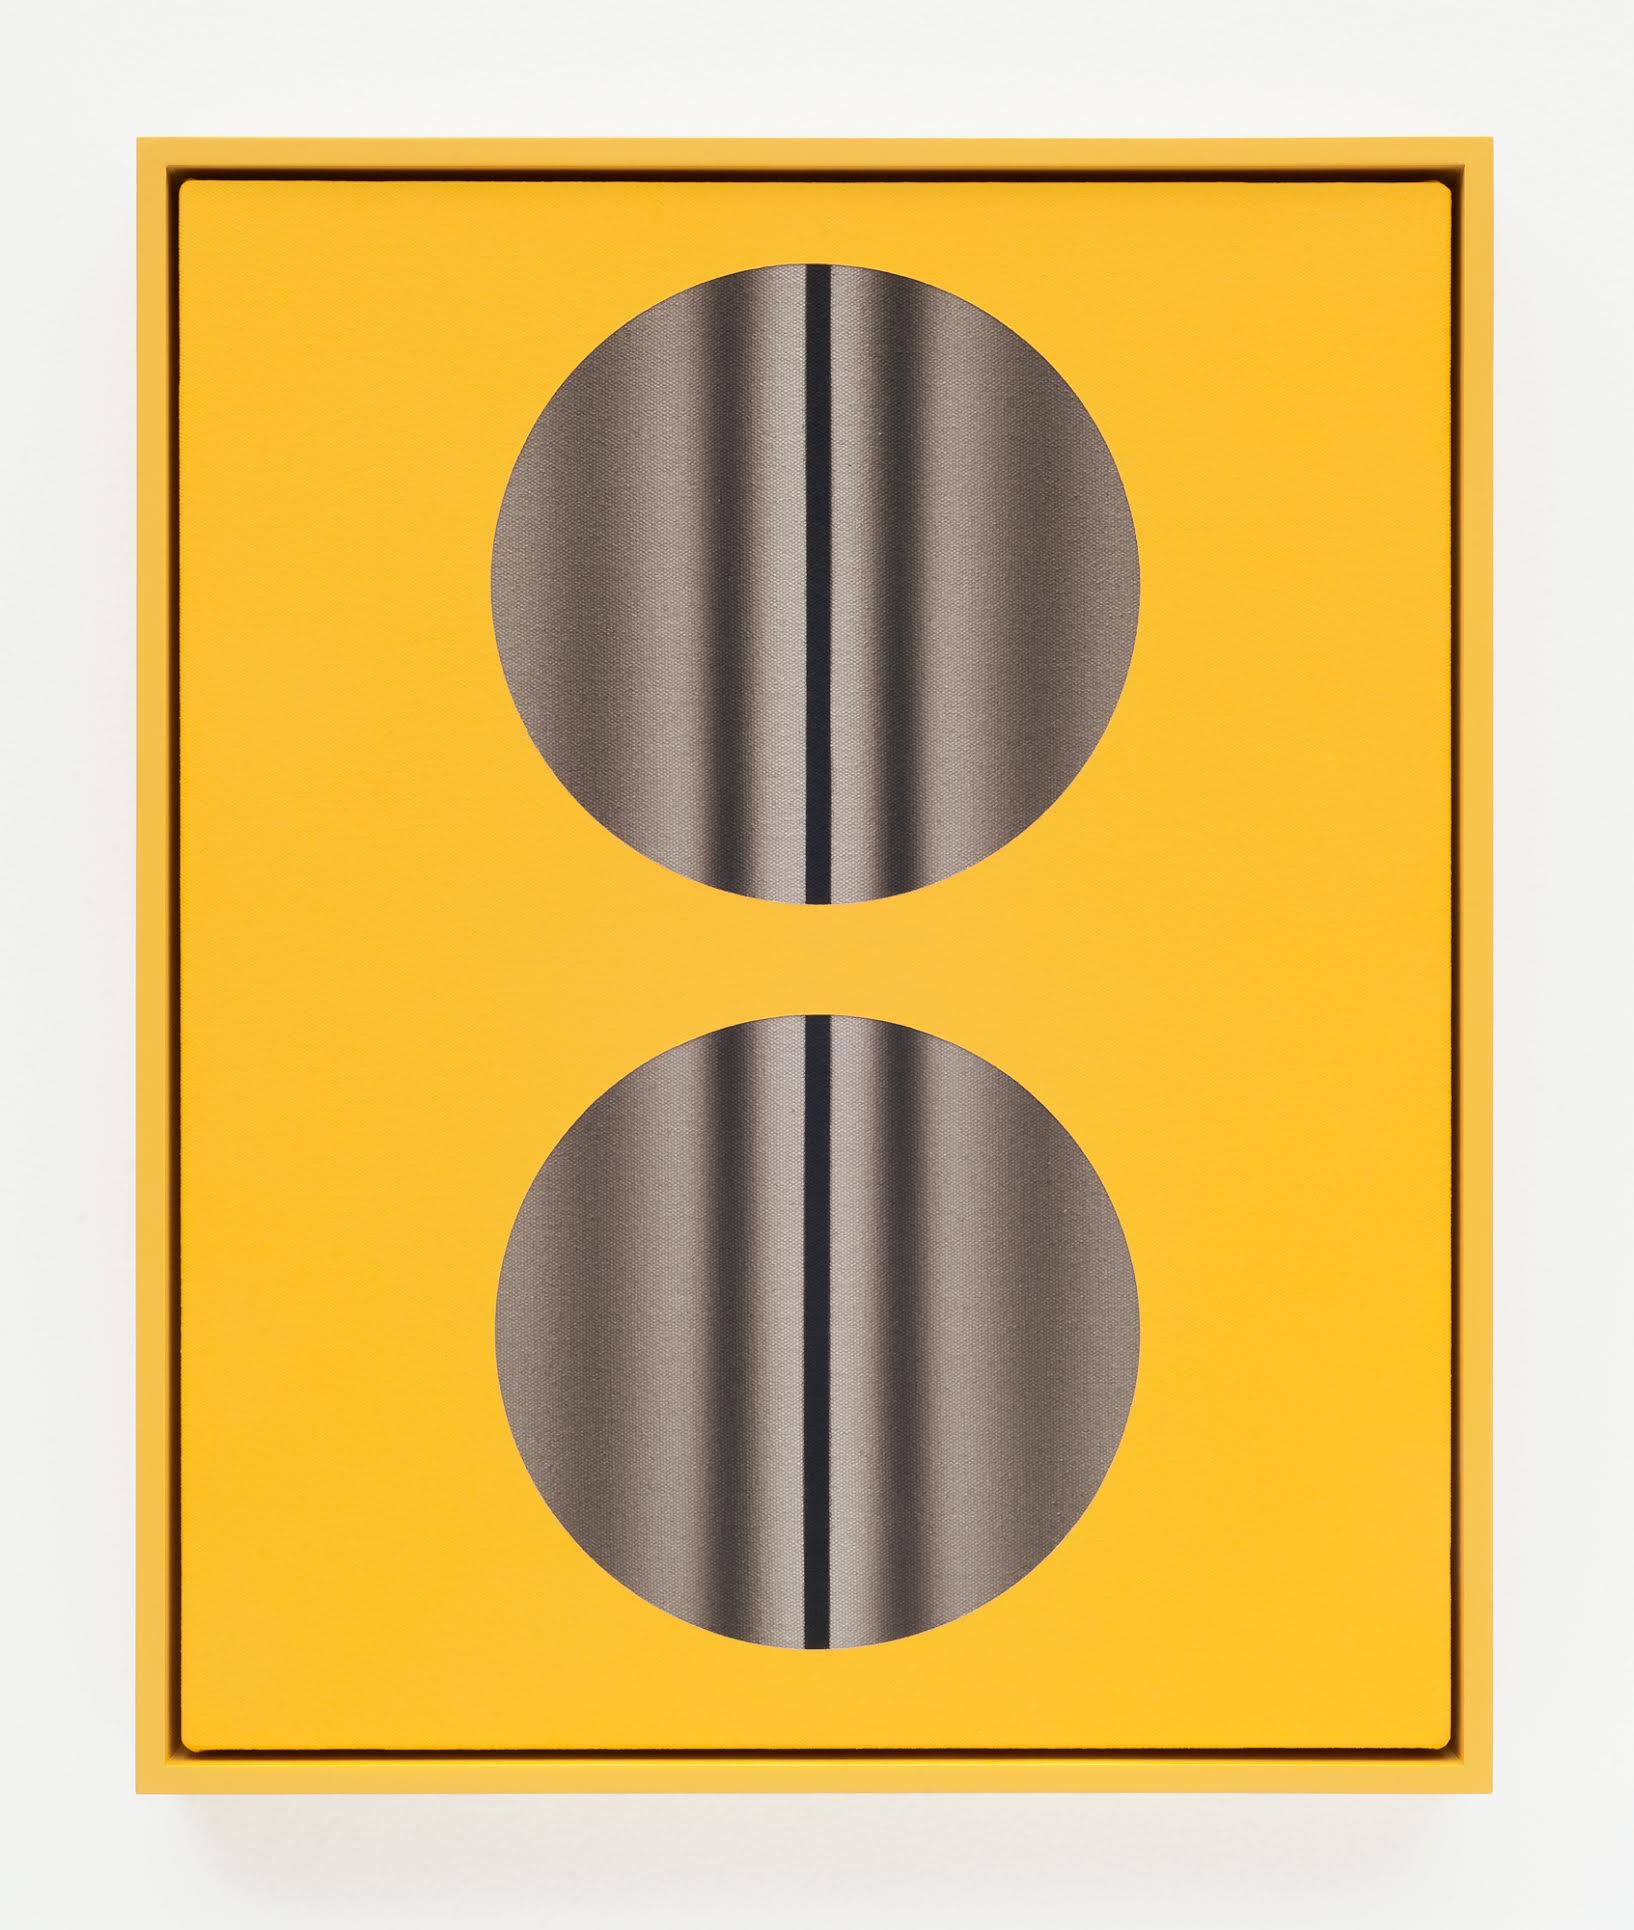 John Opera, Double Lens (yellow with lines), cyanotype, acrylic and flashe on canvas in lacquered artist frame, 21 x 17 inches